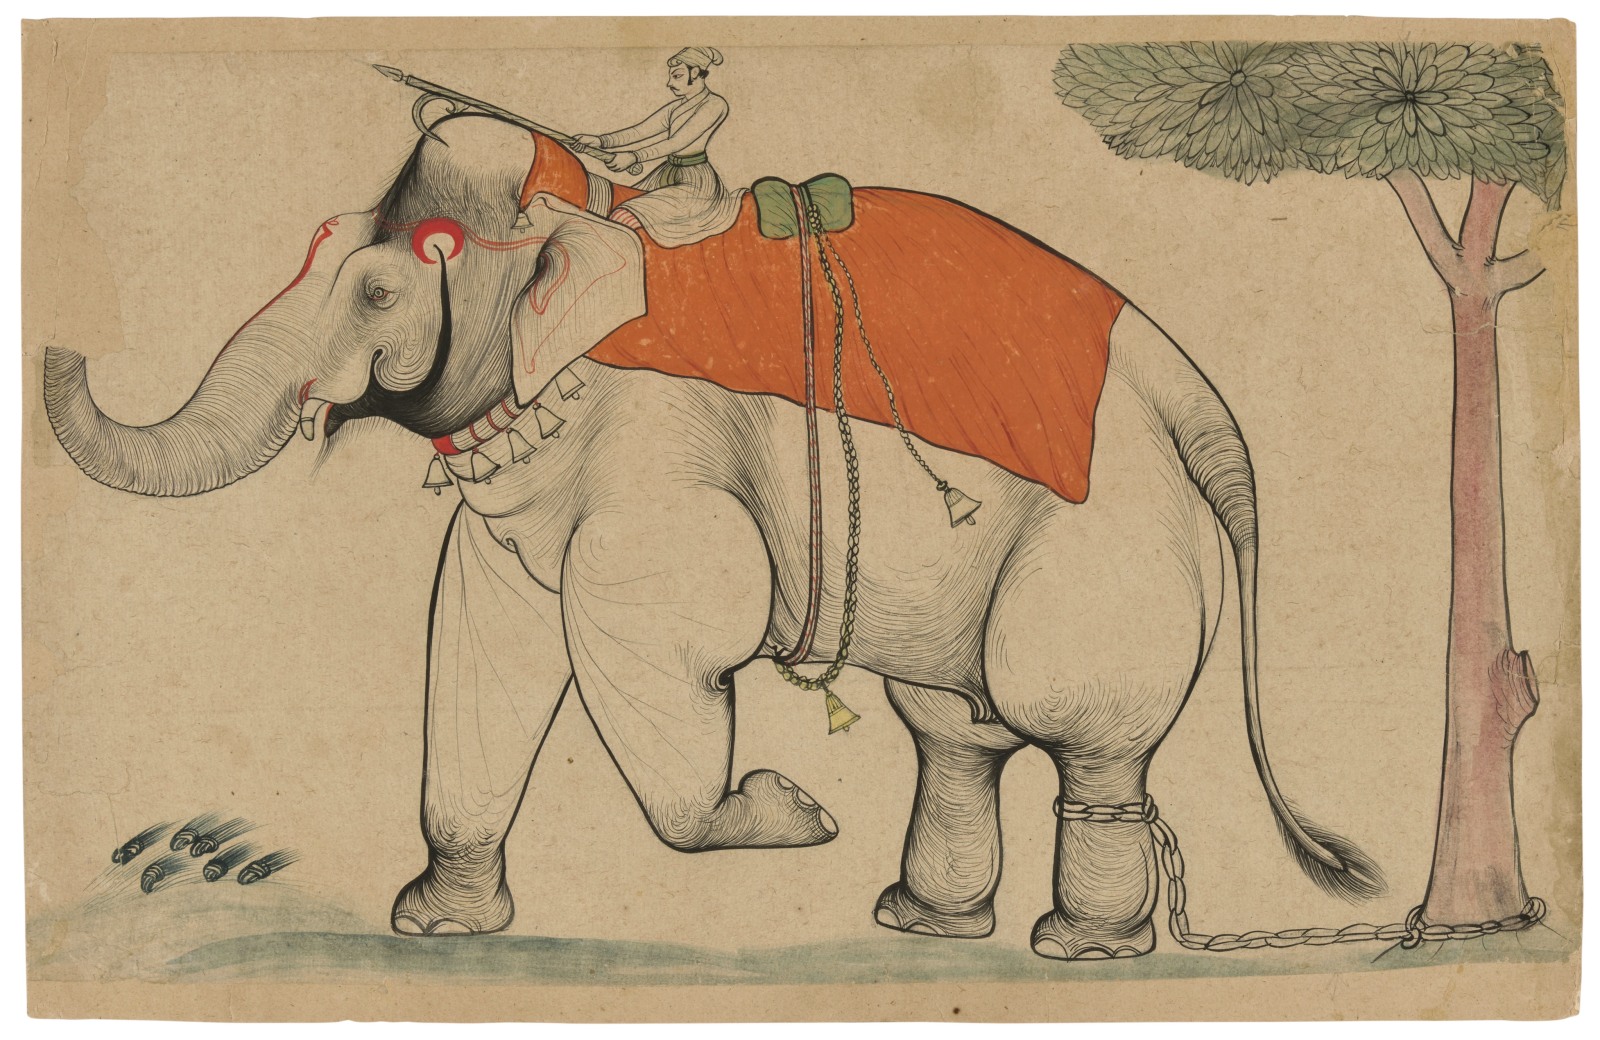 Although shackled to the tree, the elephant appears very excited, with his front left leg raised and his red-rimmed eye keenly staring ahead